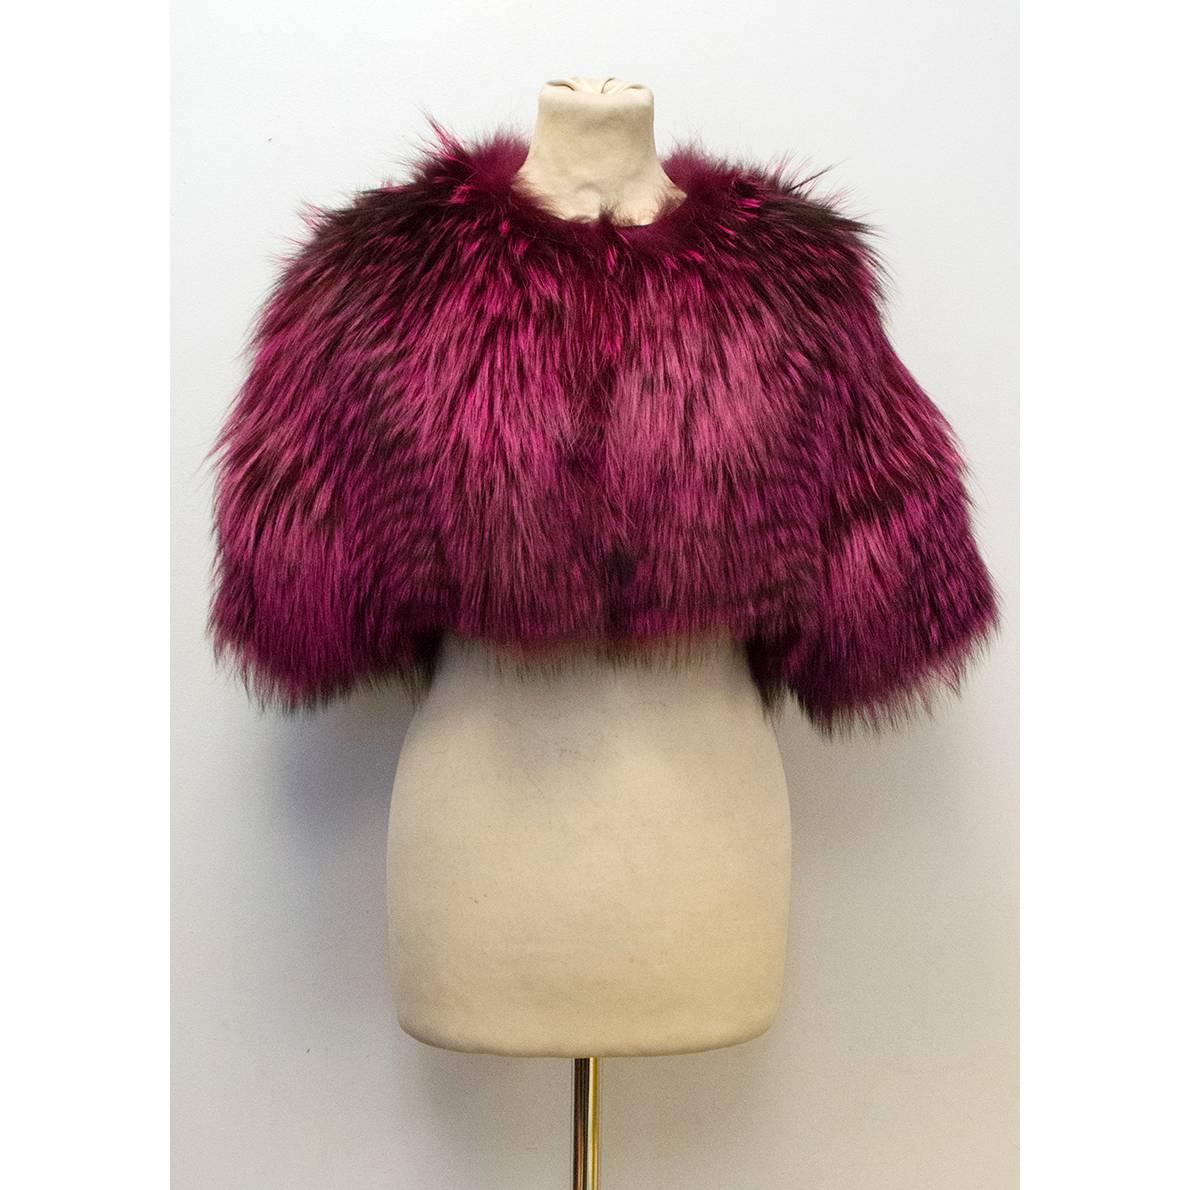 Oscar De La Renta shocking pink dyed silver Fox fur bolero. Short-sleeved with a cropped fit and a hidden clasp fastening. The Fox fur country of origin is Finland. Made in the USA. Size XS

100% silver Fox Fur with a 100% Silk lining. Perfect